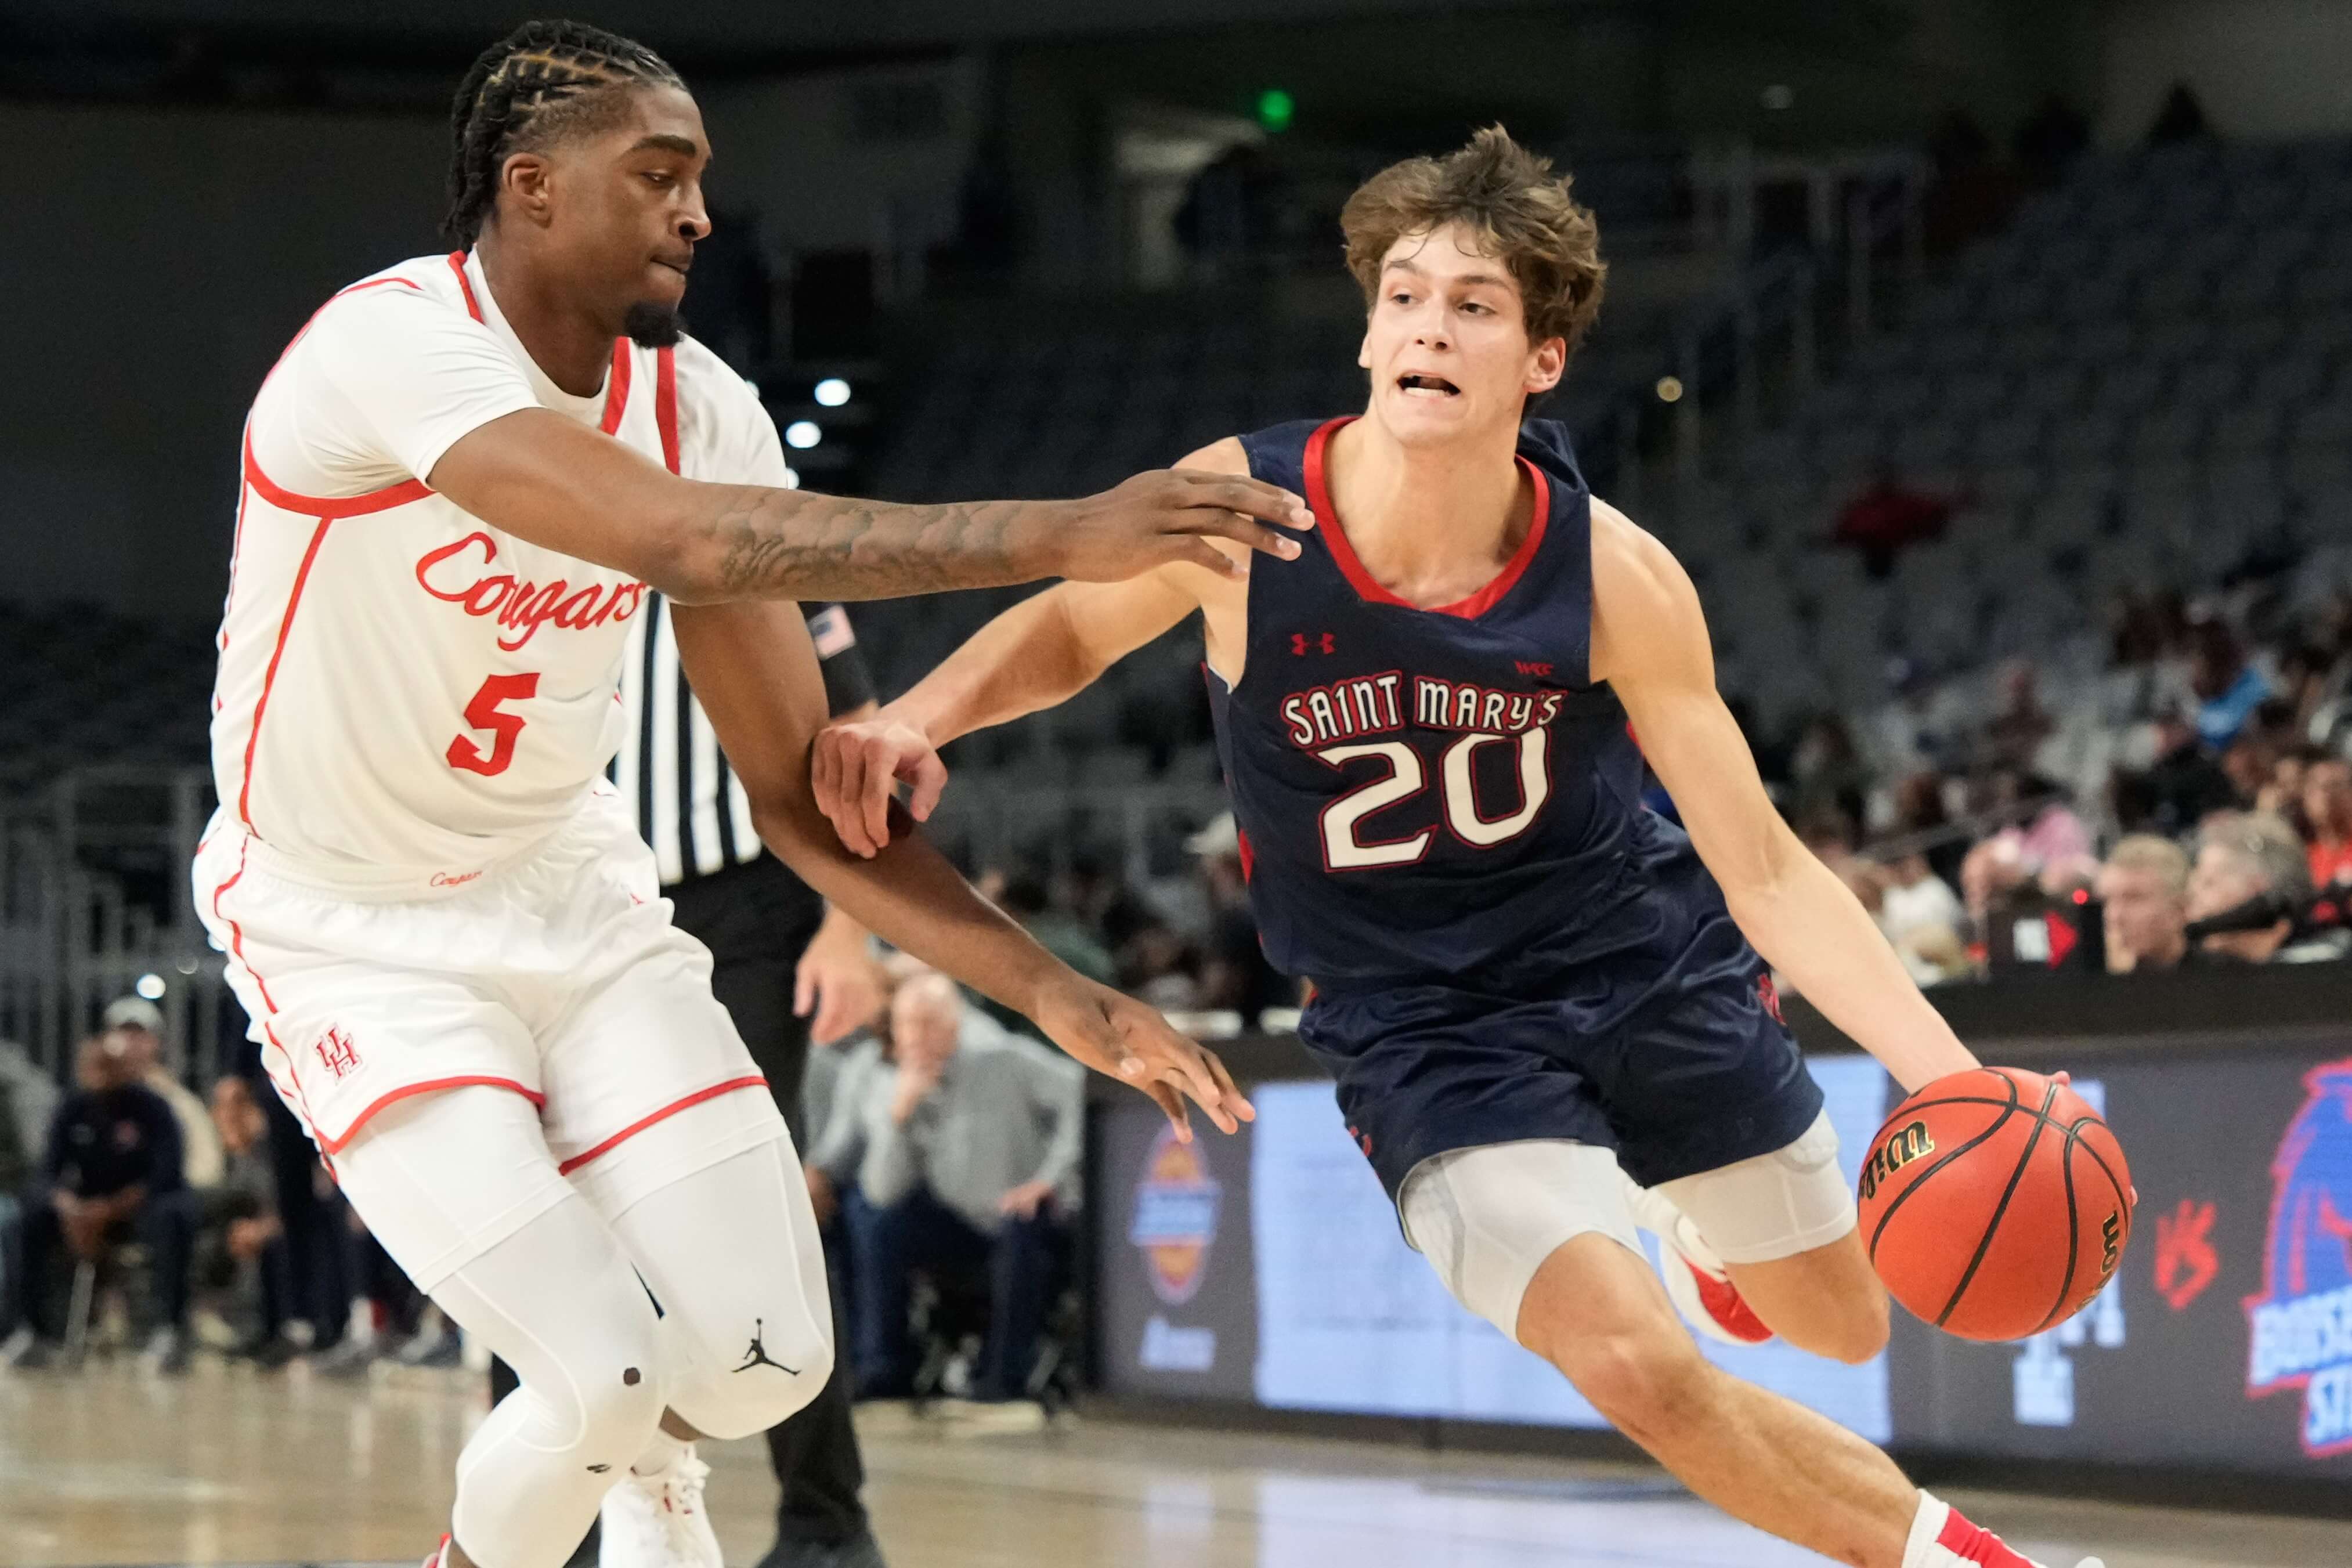 How To Bet - Gonzaga vs St. Mary's Odds, Picks and Predictions: Bulldogs' Defense Will Oblige Over Bettors